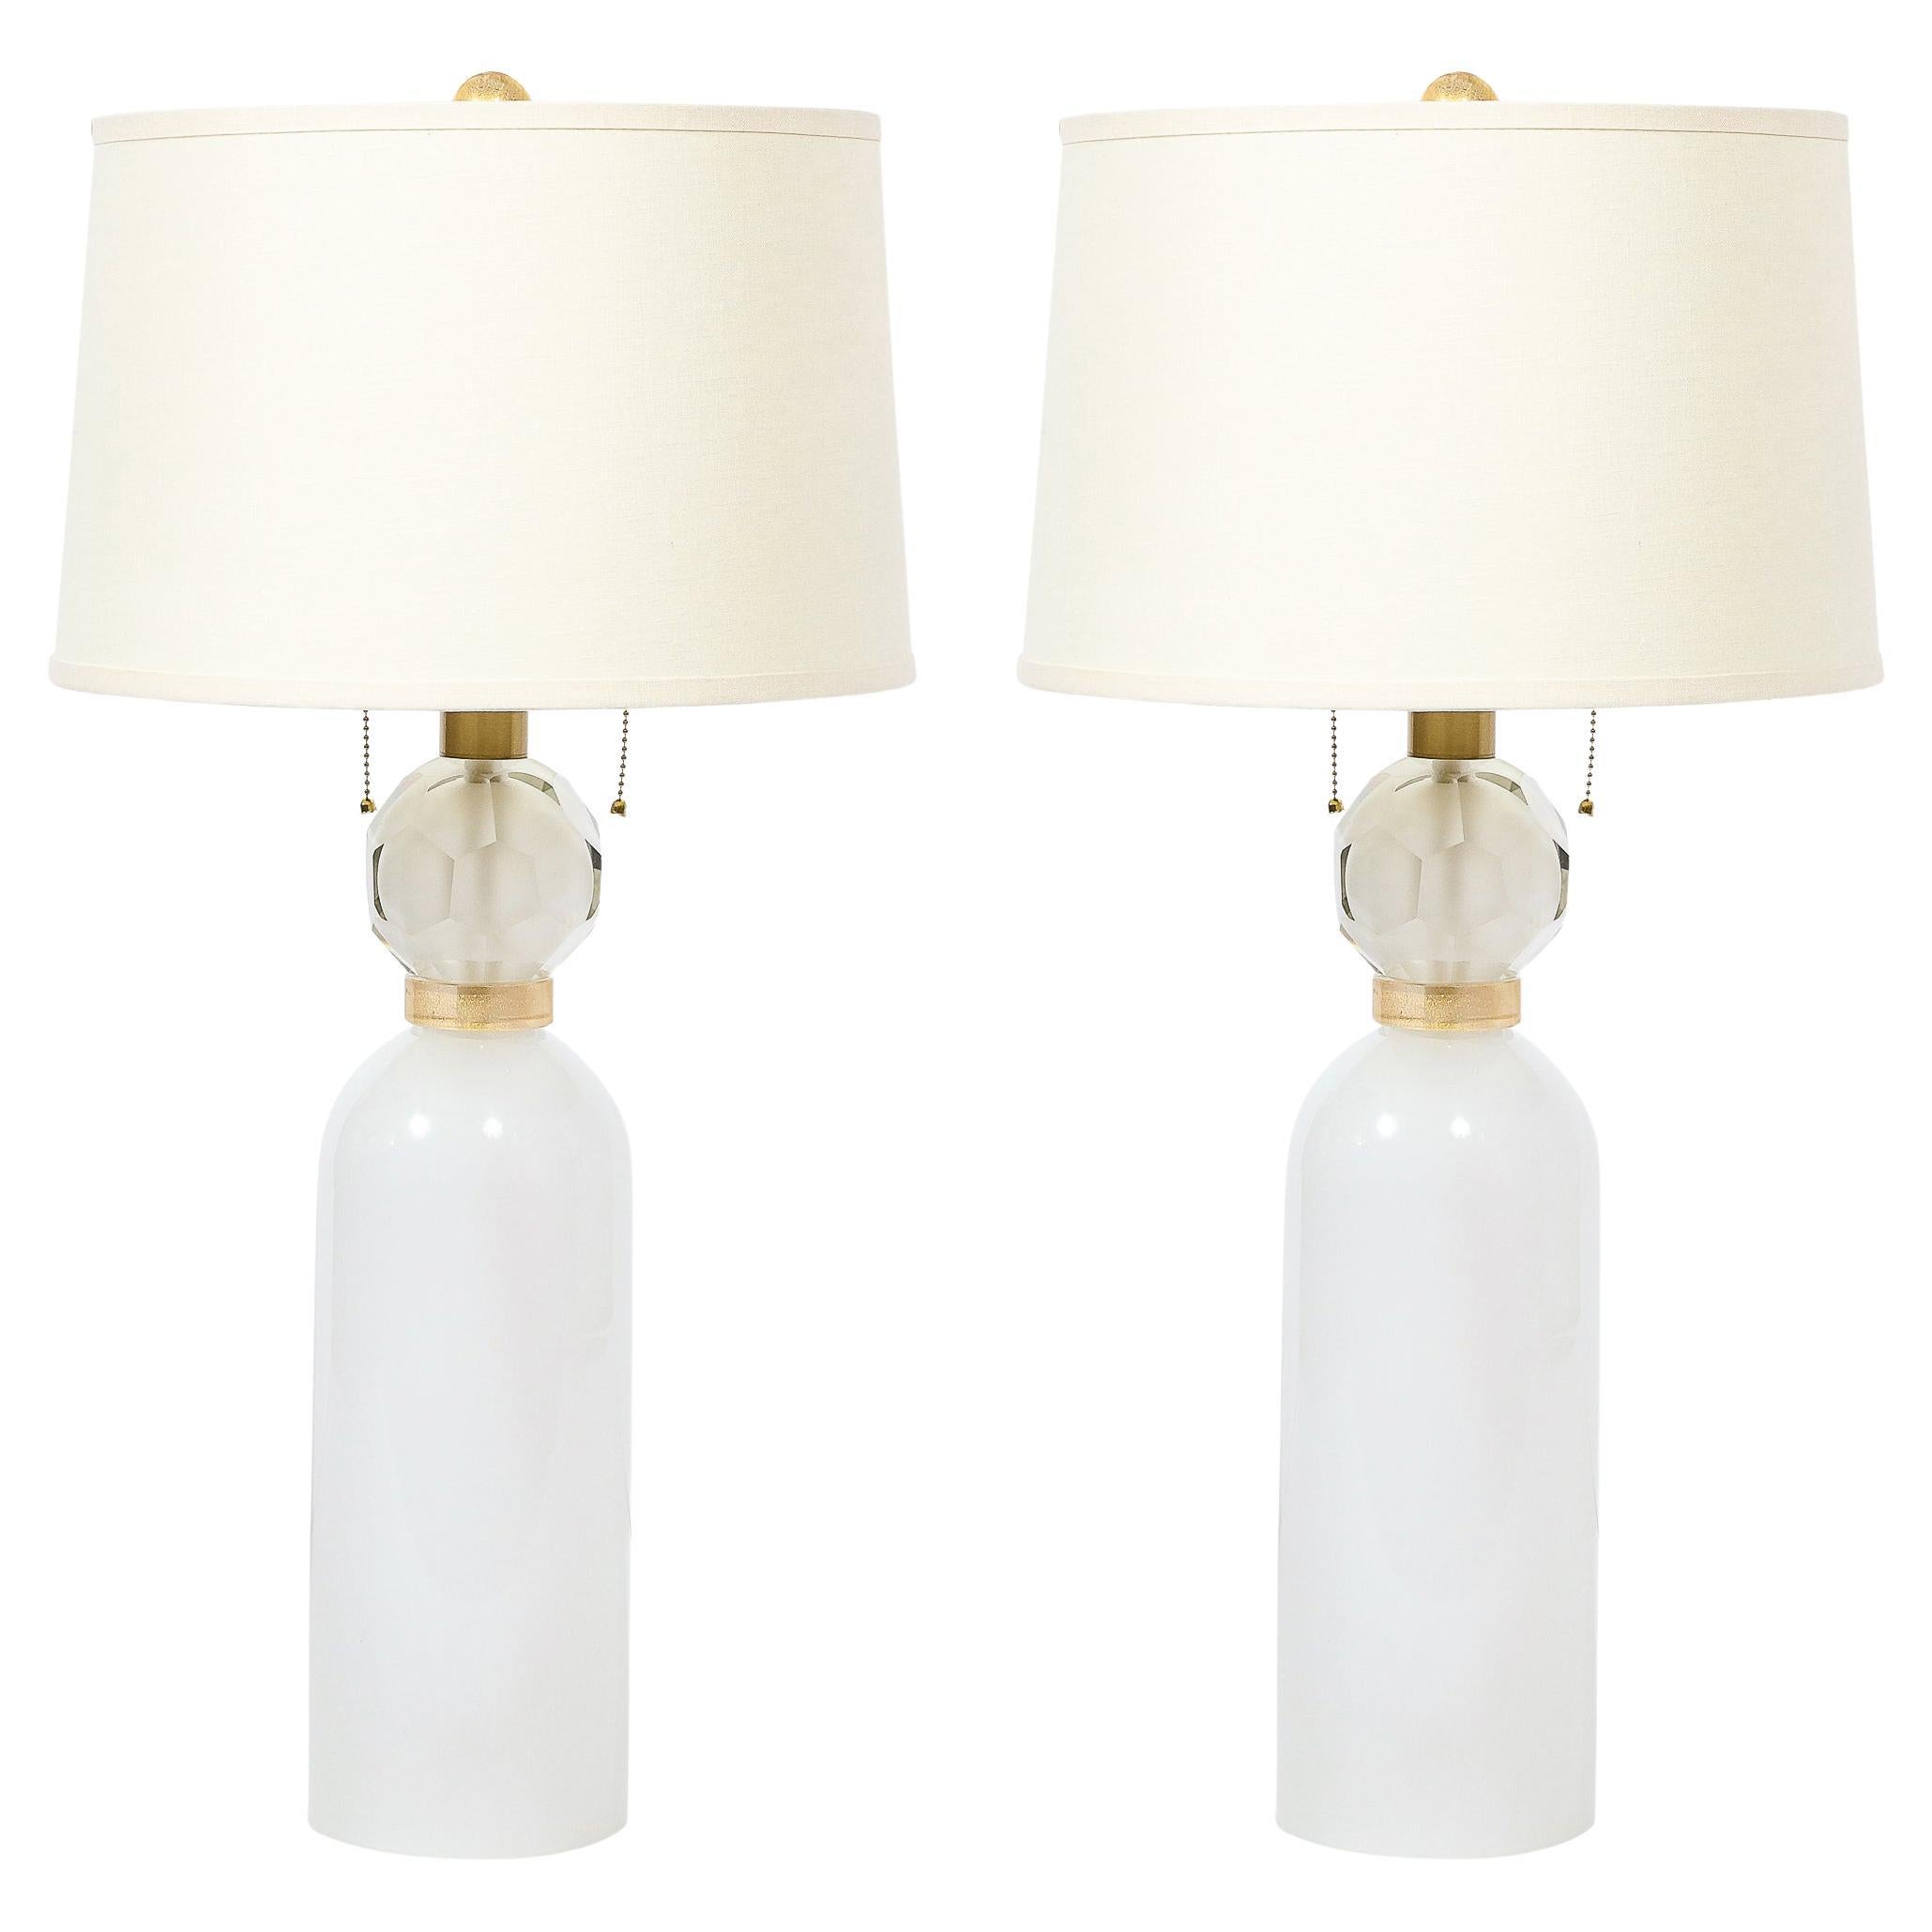 Pair of Hand-Blown White Murano Glass Lamps with 24K Gold Banded Detailing